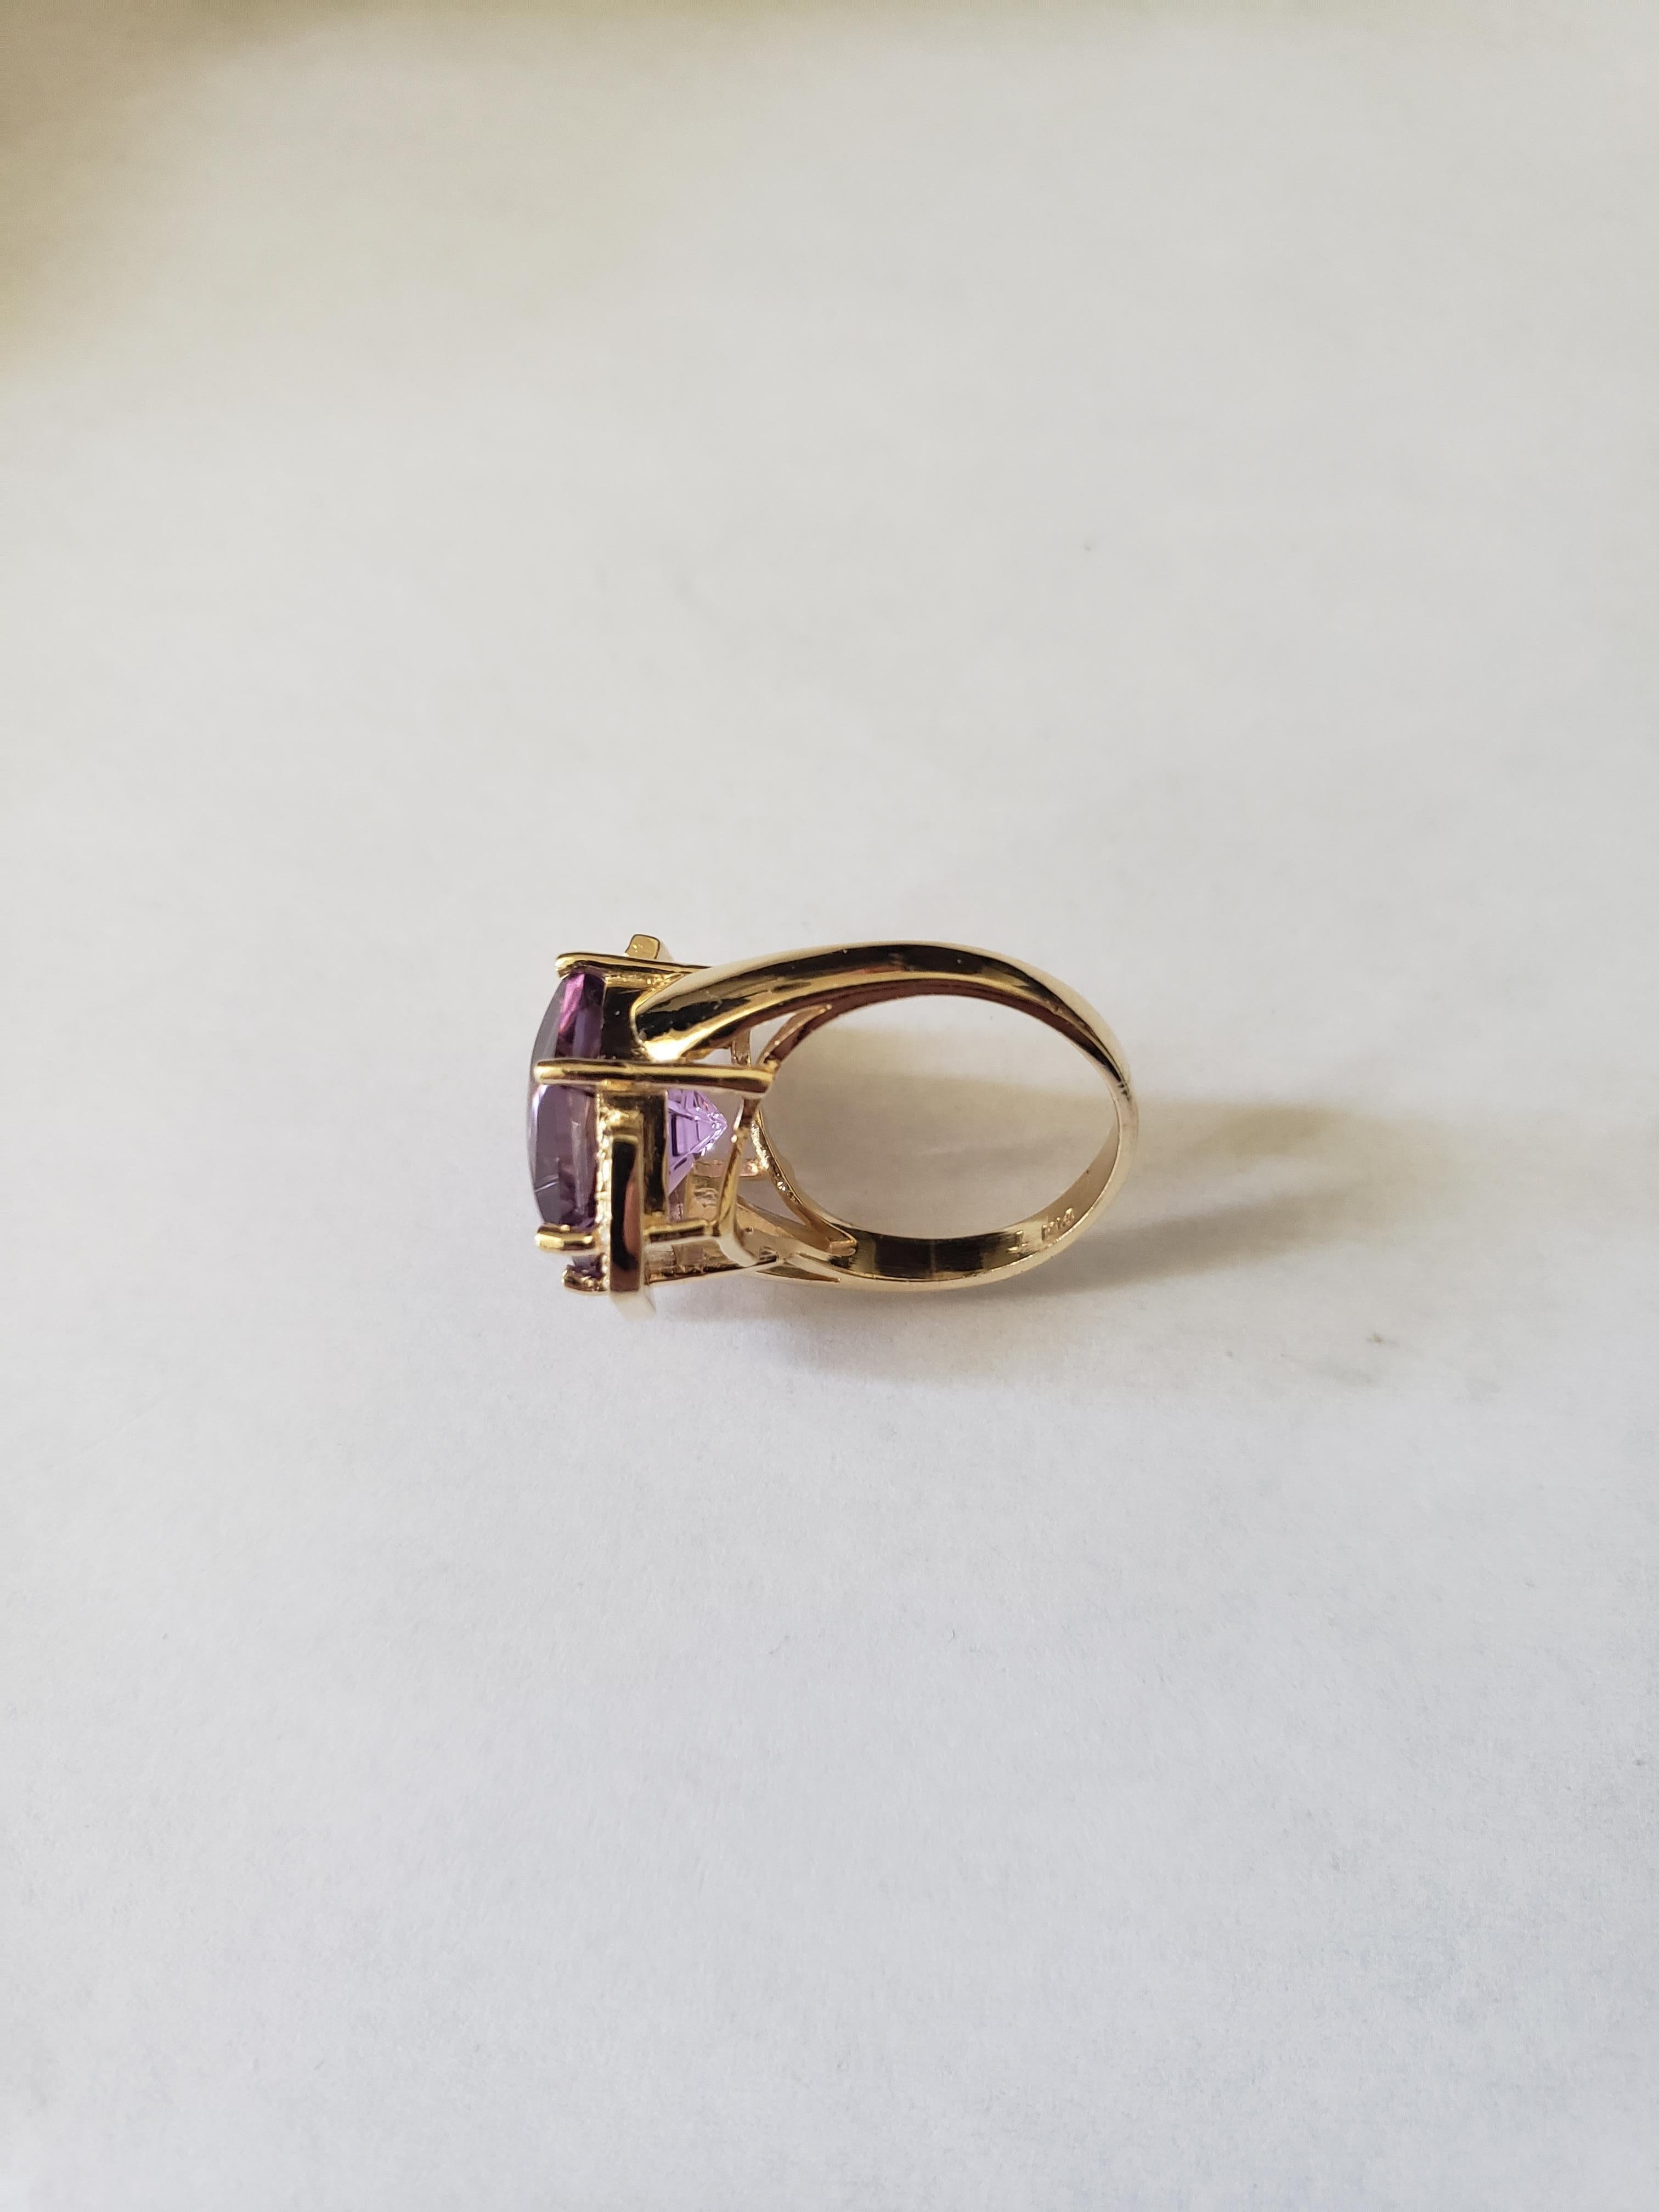 NEW 8 Ct. Natural Amethyst Ring with Diamonds in 14k Solid Yellow Gold  For Sale 1